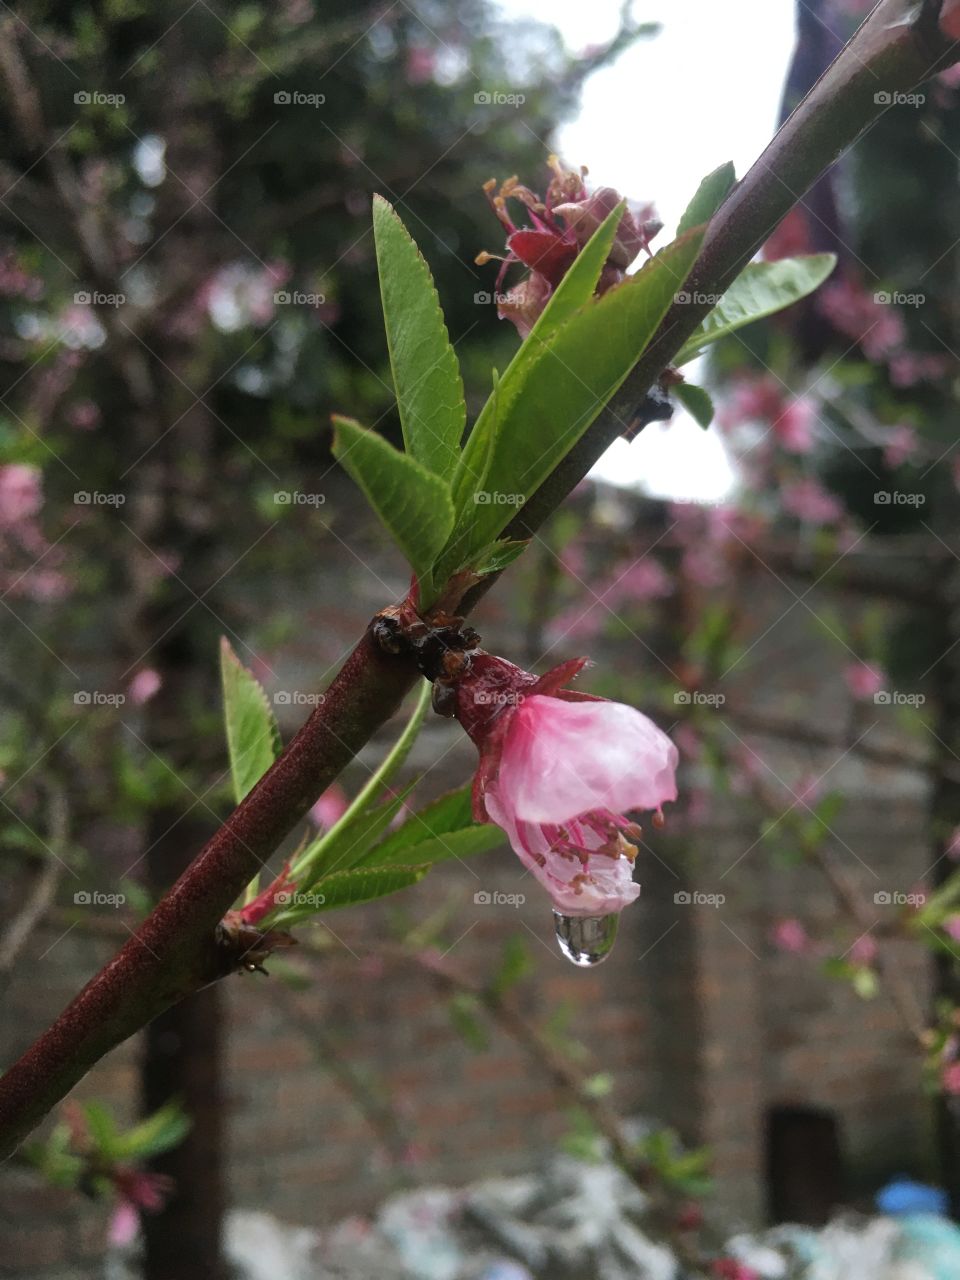 Rain and spring 